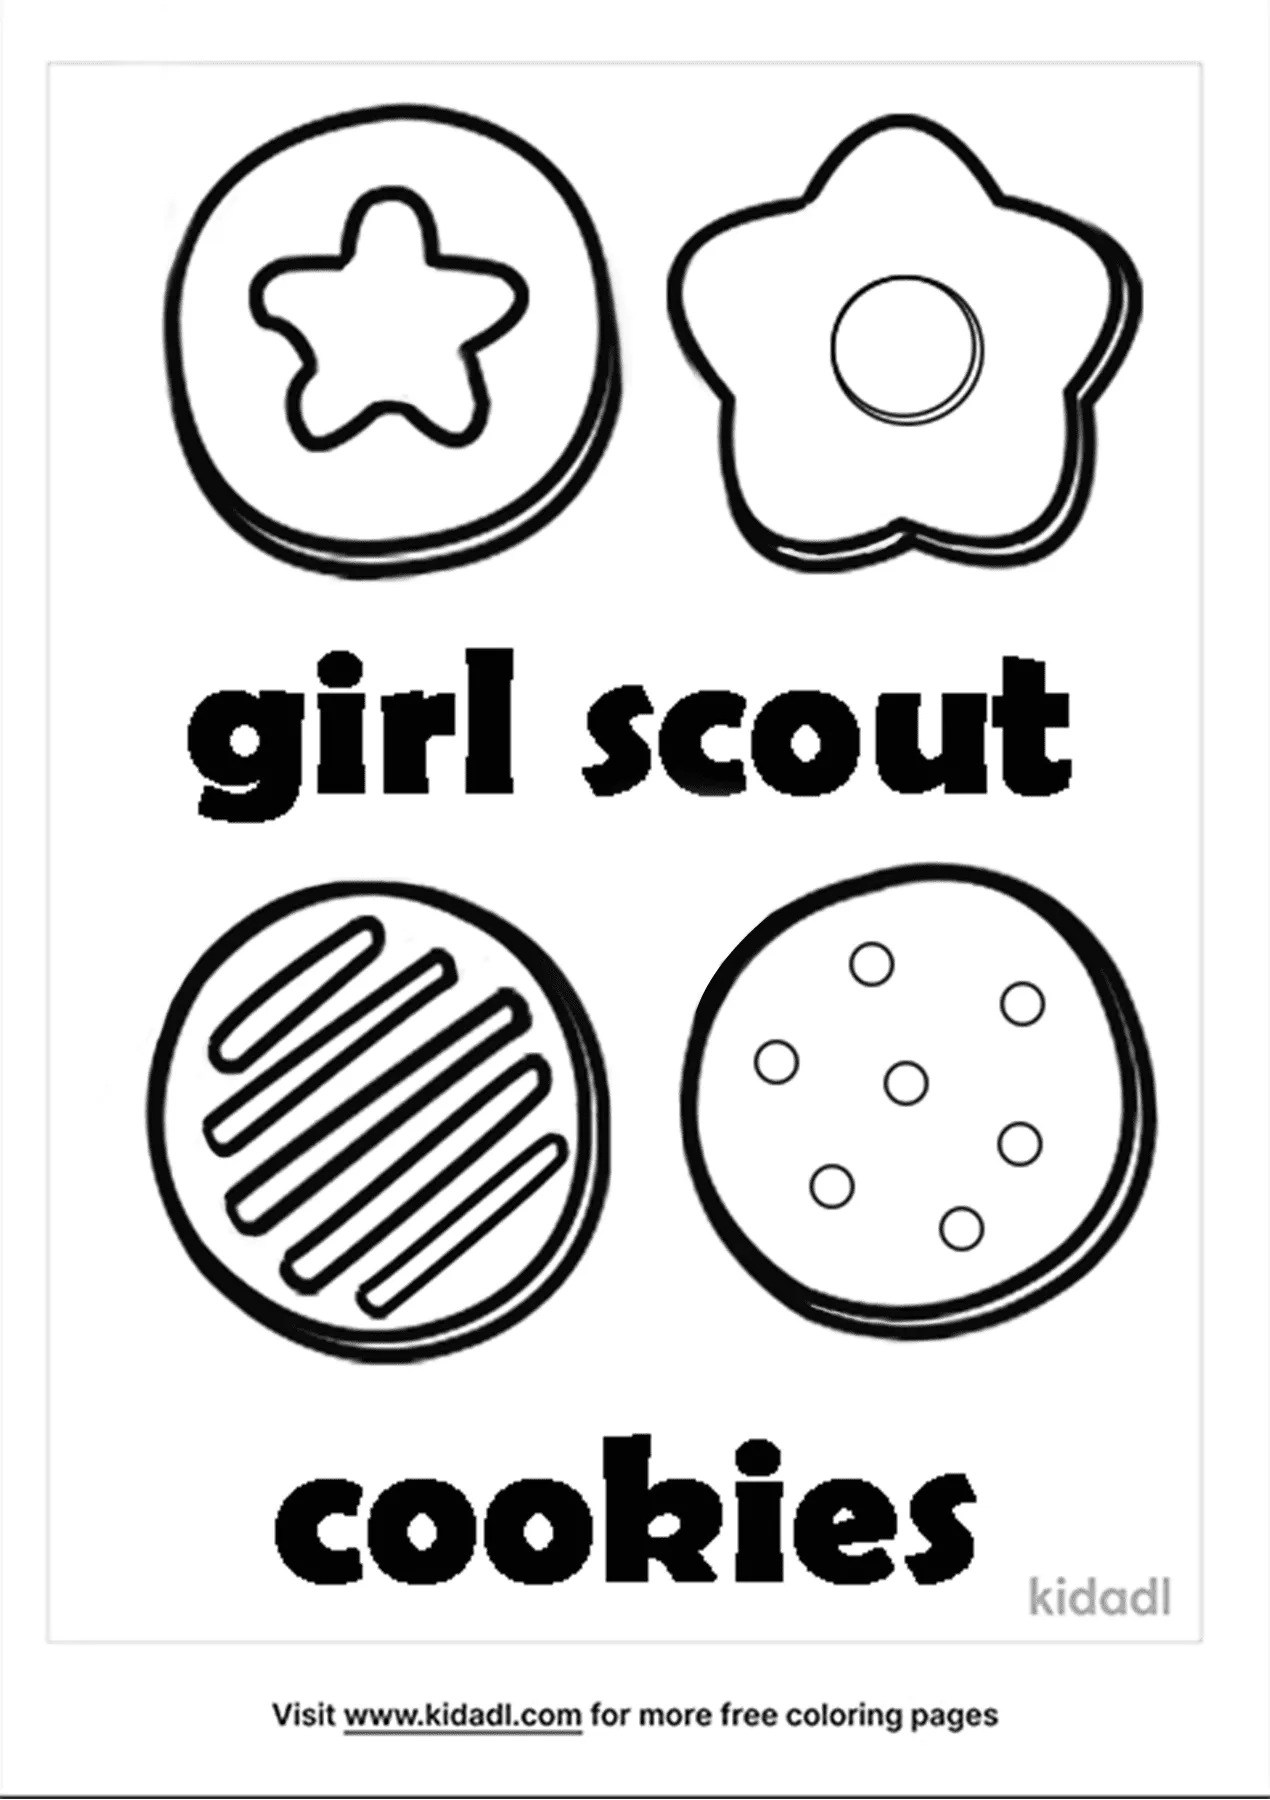 Girl Scout Cookies Coloring Pages   Free Food and drinks Coloring ...